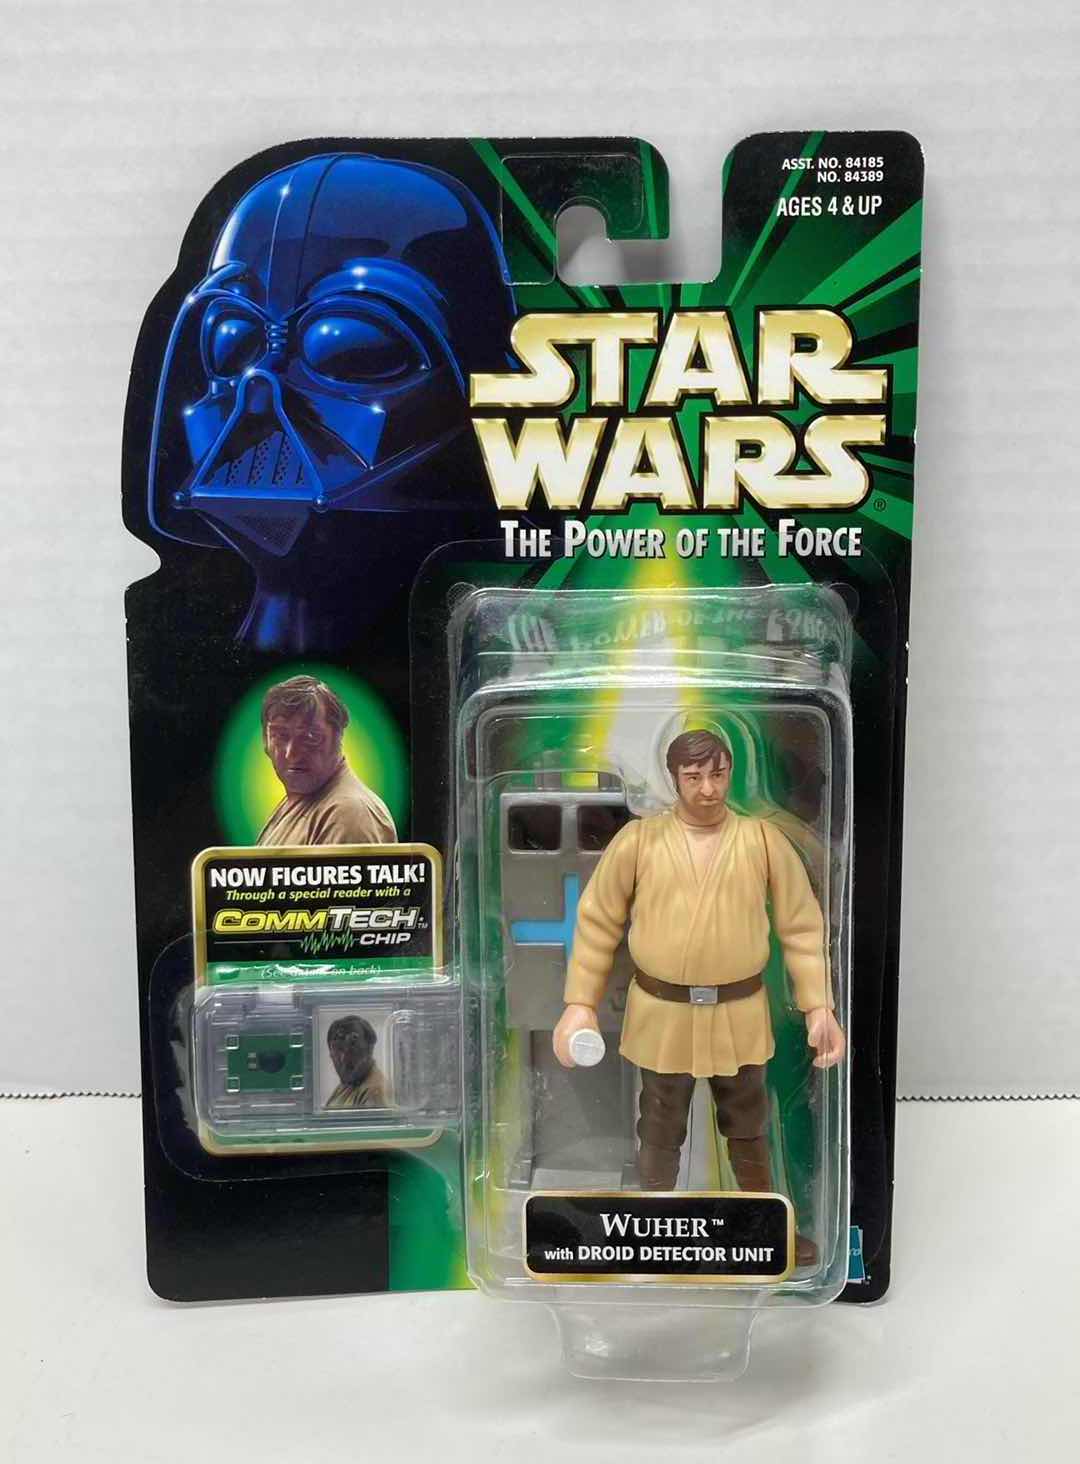 Photo 1 of NEW STAR WARS THE POWER OF THE FORCE ACTION FIGURE, WUHER W DROID DETECTOR UNIT & TALKING COMMTECH CHIP